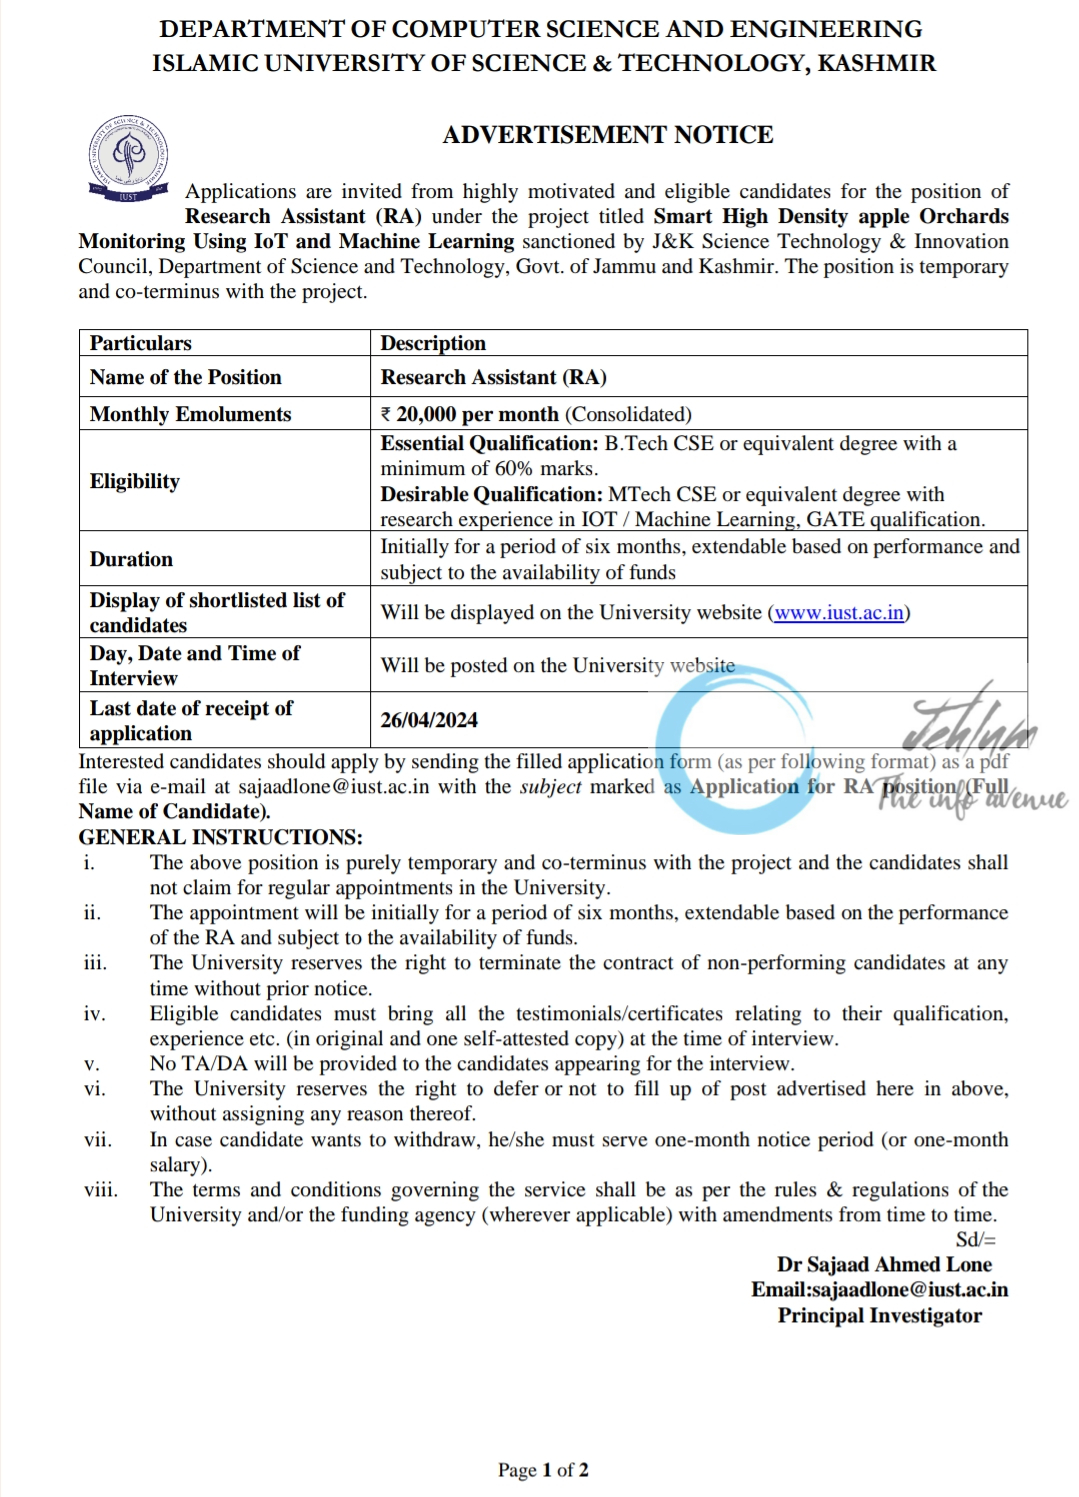 IUST KASHMIR DEPTT OF COMPUTER SCIENCE AND ENGINEERING RESEARCH ASSISTANT ADVERTISEMENT NOTICE 2024